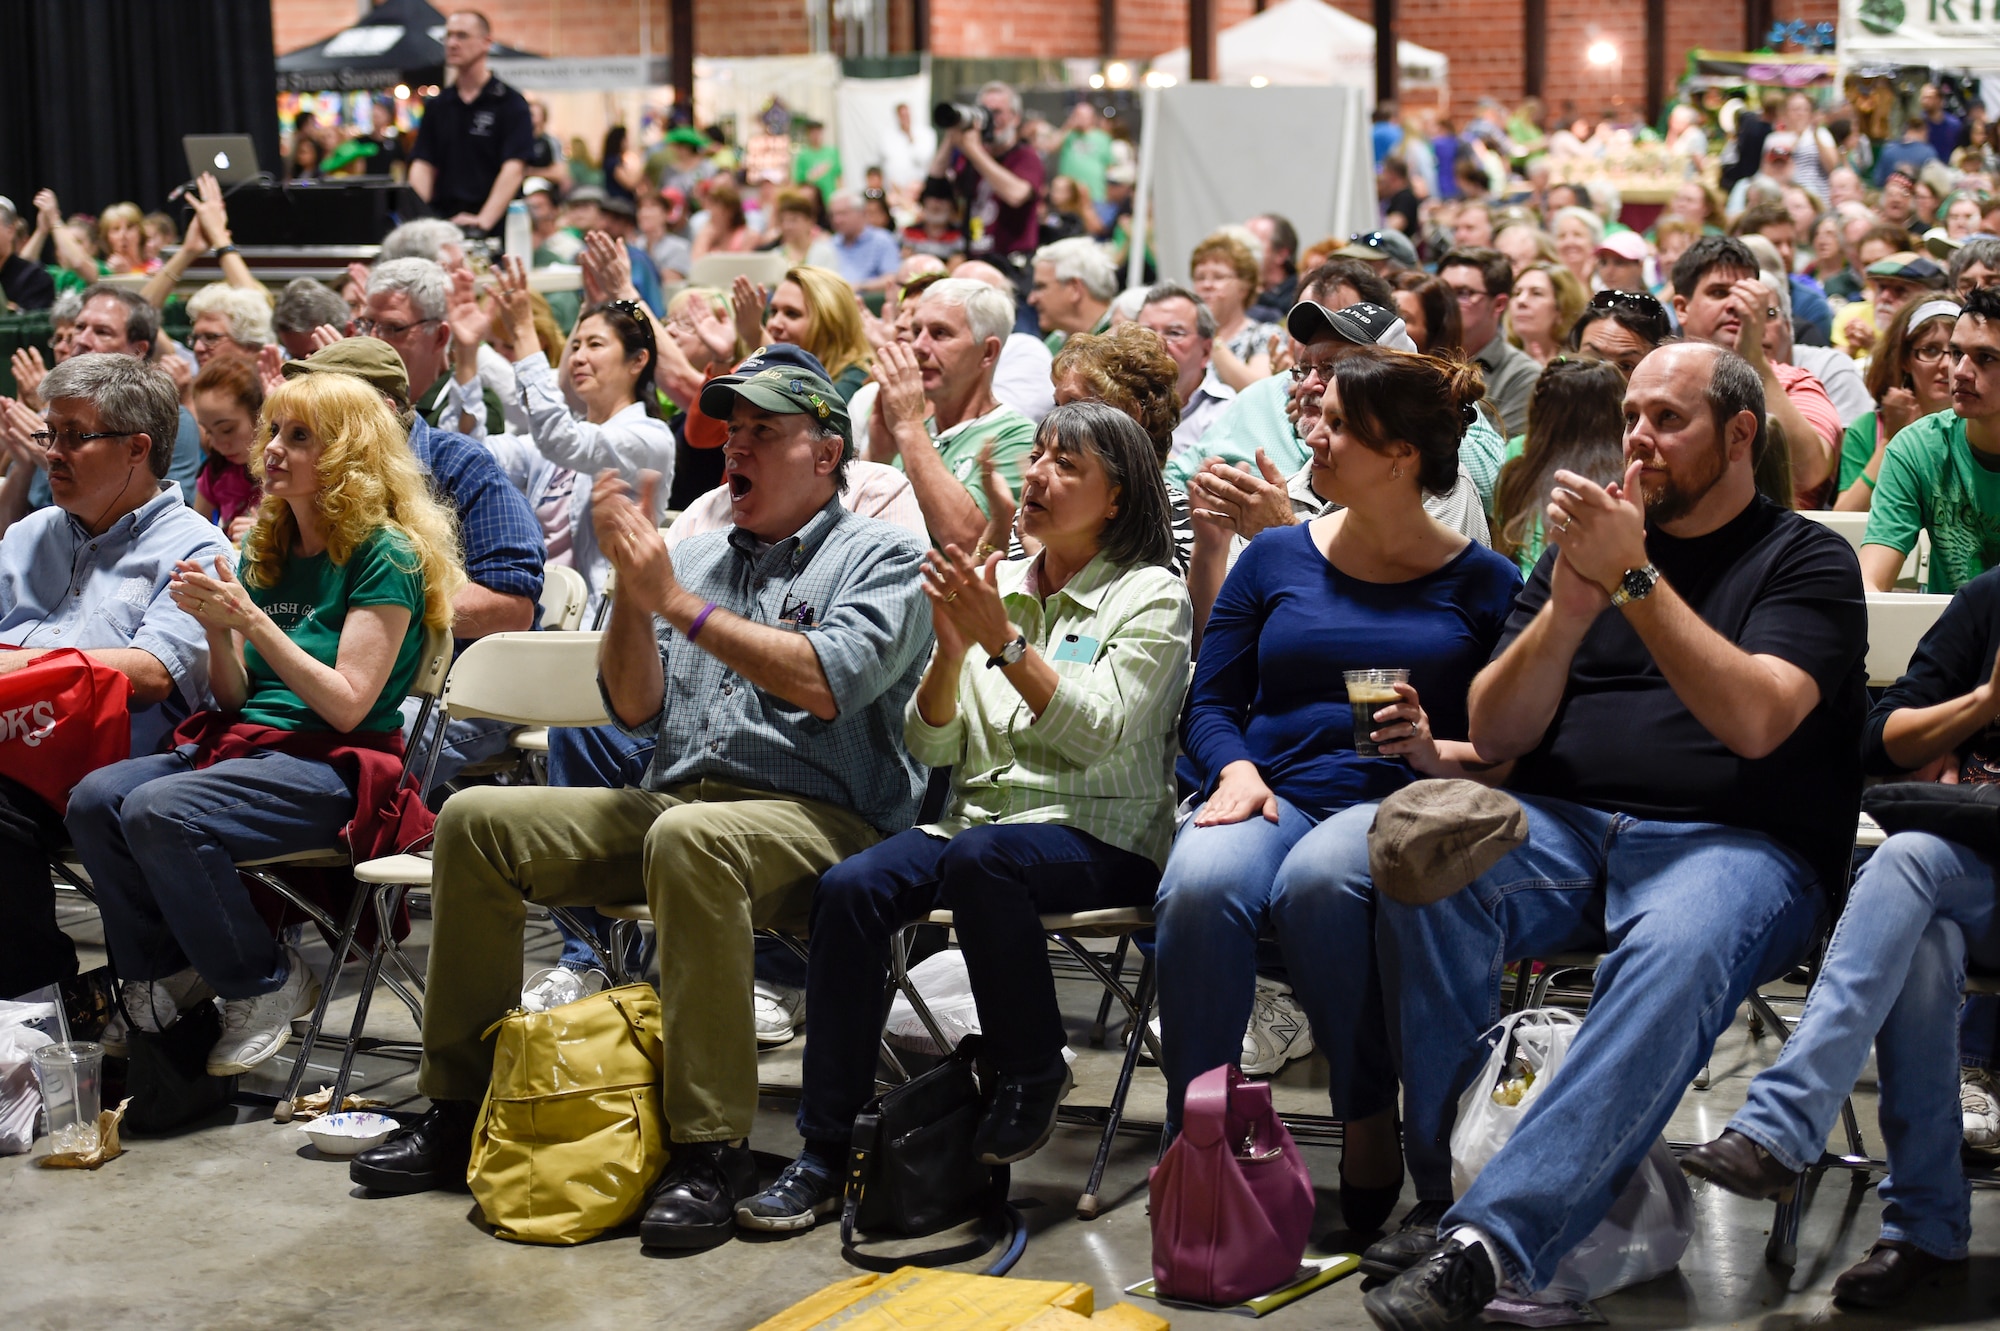 A crowd cheers during a performance by the U.S. Air Force’s Celtic Aire at the North Texas Irish Festival in Dallas, Texas, March 5, 2016. This year’s festival was themed “Legends and Legacy” to highlight some of the true legends of Irish music as well as emerging musicians. (U.S. Air Force photo/Senior Airman Ryan J. Sonnier/RELEASED)